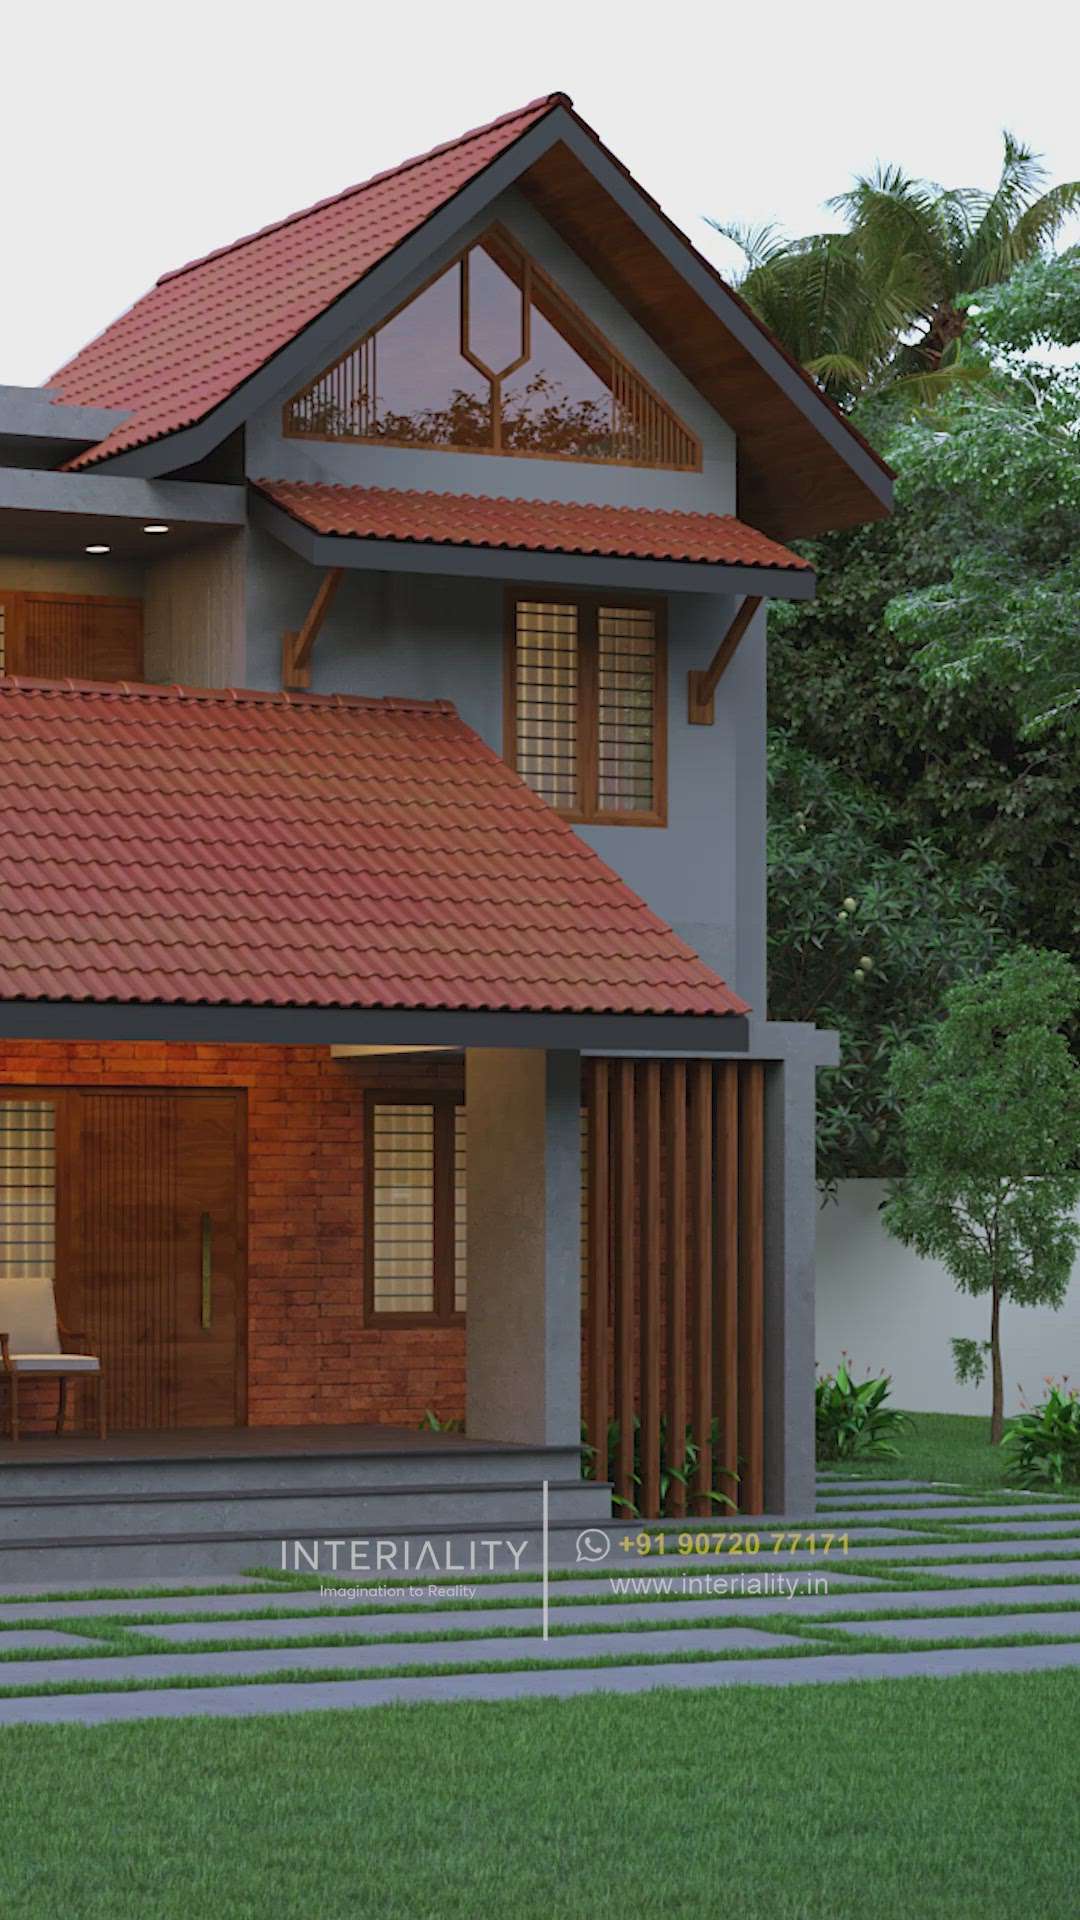 3D Home Visualization

Doing Online Design
▶️Planning
▶️Exterior Design
▶️Interior Design
▶️Landscape Design

Whatsapp: +91 90720 77171

#kerala #keralahomes #keralahomedesigns
#budgethomes #budgethome
#smallhome
#contemporaryhouse
#contemporarydesigns
#homeconcept
#vanithaveedu #veedu #homeconcept #interiordesign #budgethomes #budgethome #designkerala #designerconcept #architecture #homes #homestyle #indiandesigner #indianarchitecture #india #reelsofkerala #reelsindia